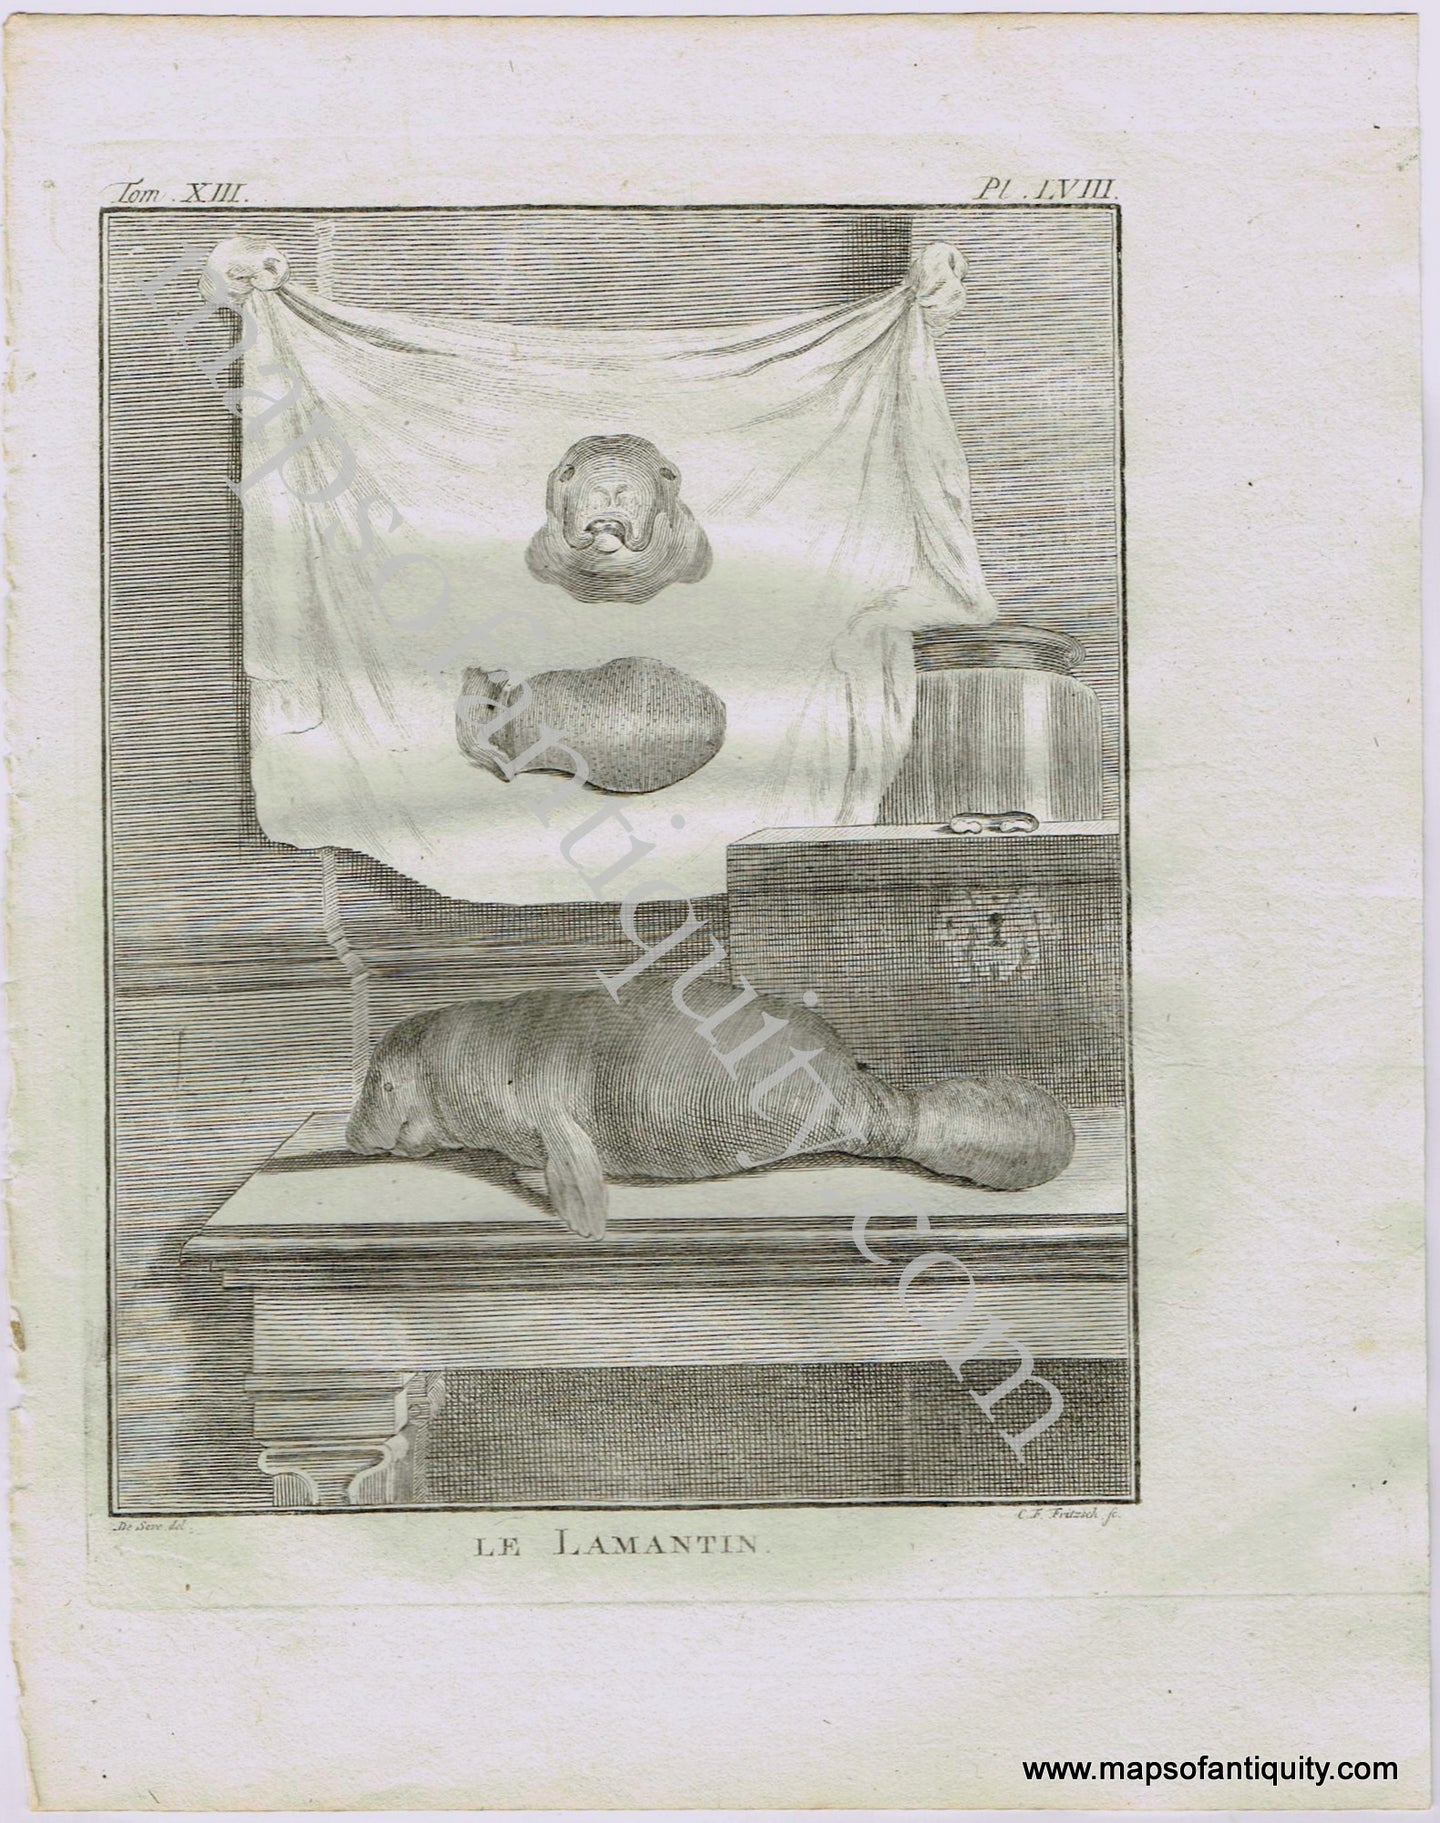 Antique-Early-Print-Prints-Engraved-Engraving-Illustration-Illustrated-Le-Lamantin-Manatee-Manatees-Natural-History-Buffon-Schneider-1780s-1700s-Late-16th-Century-Maps-of-Antiquity